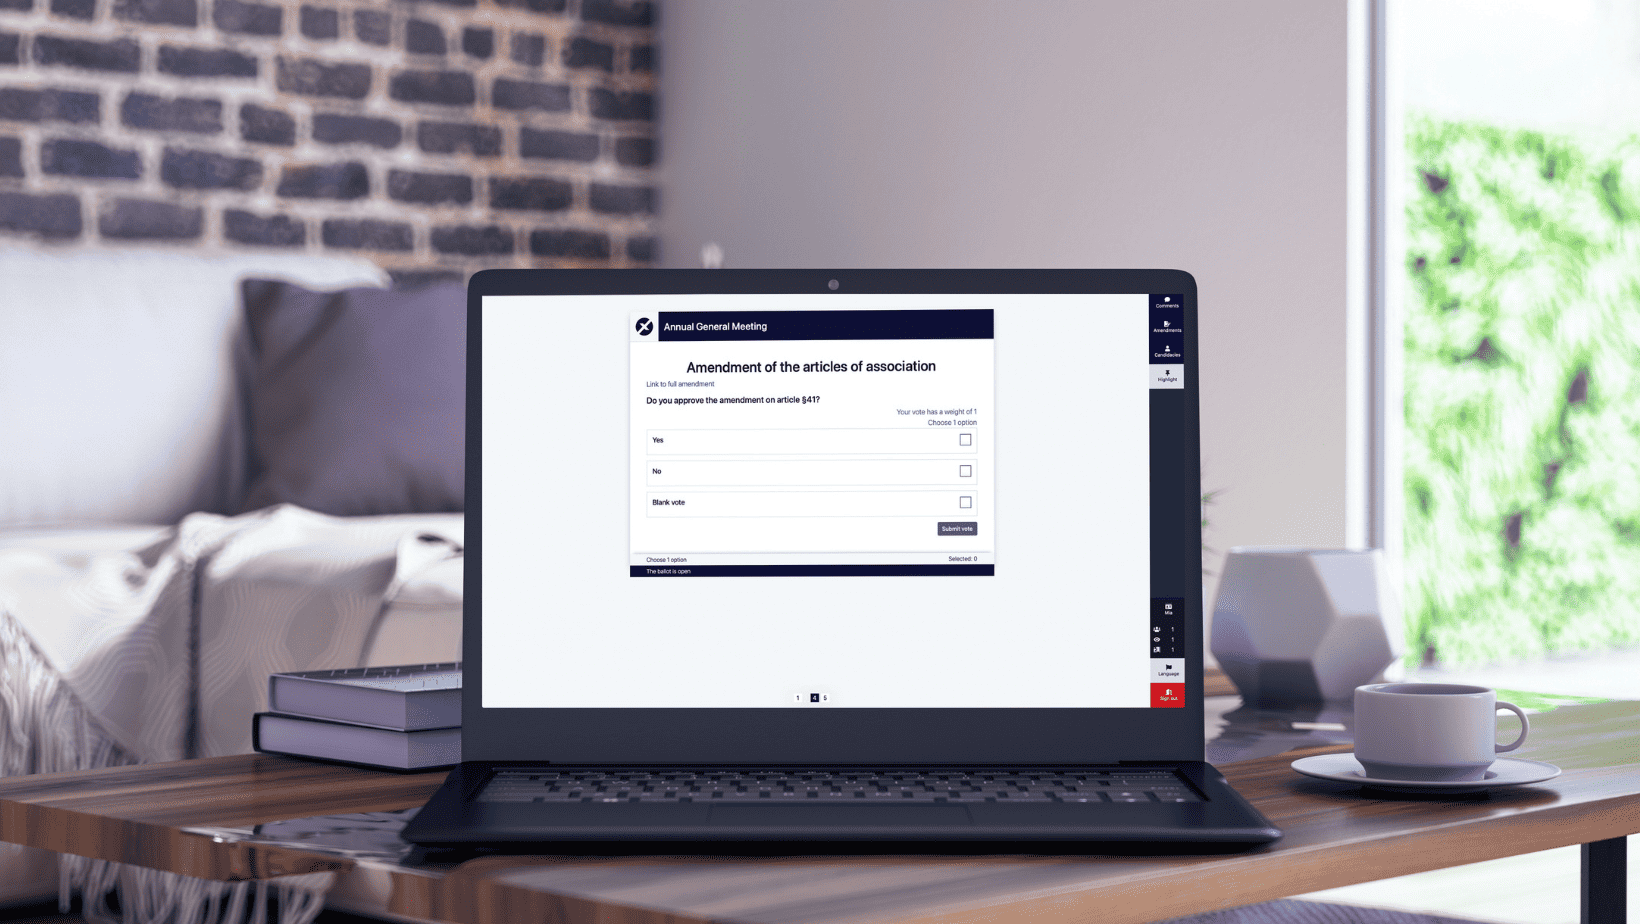 Conference UI Capterra – Assembly Voting